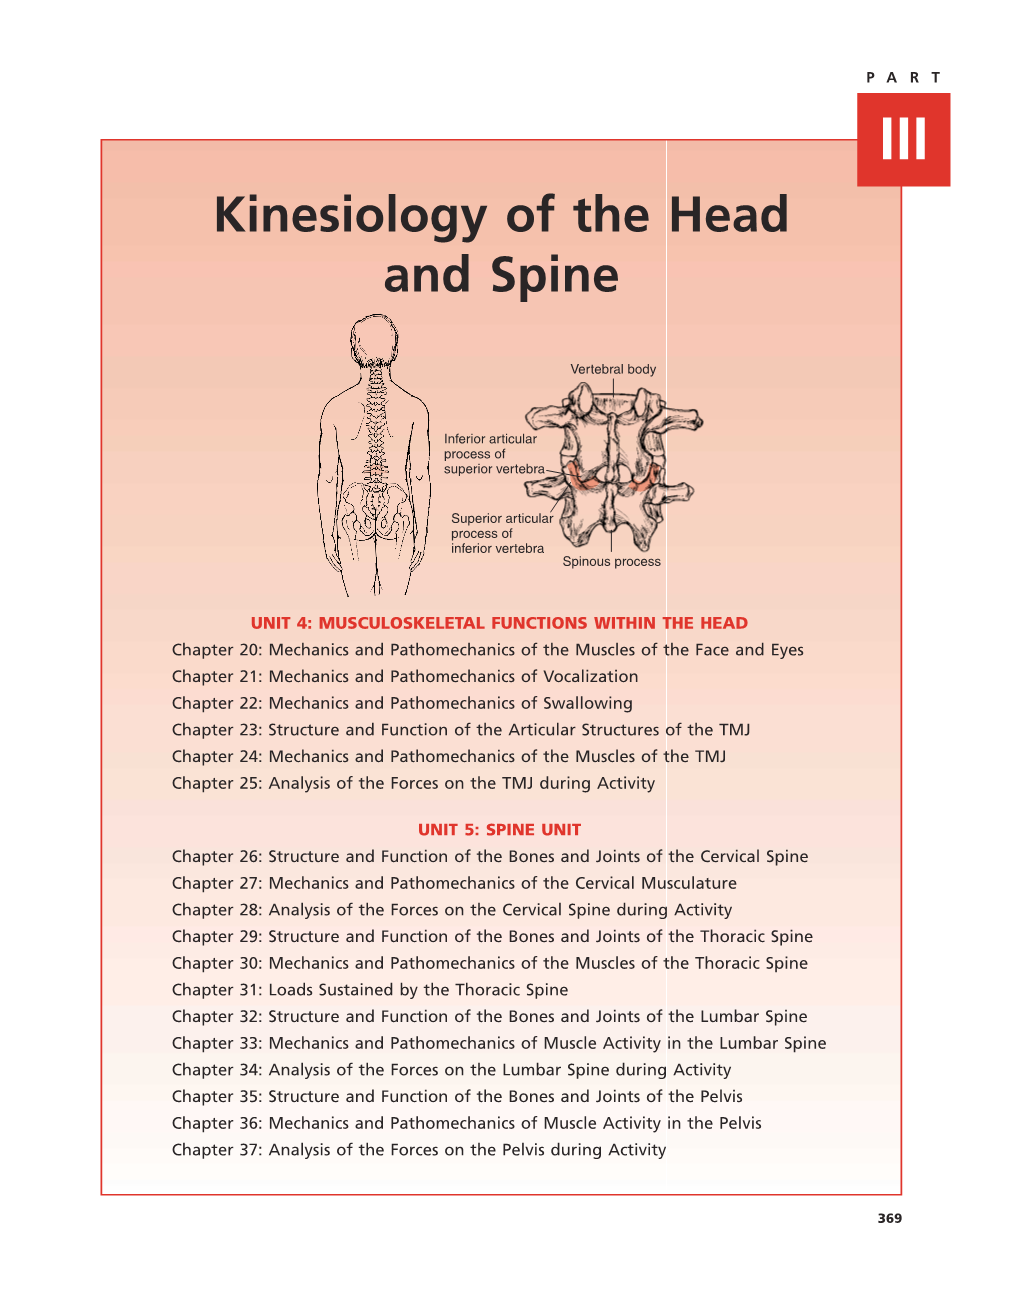 Kinesiology of the Head and Spine